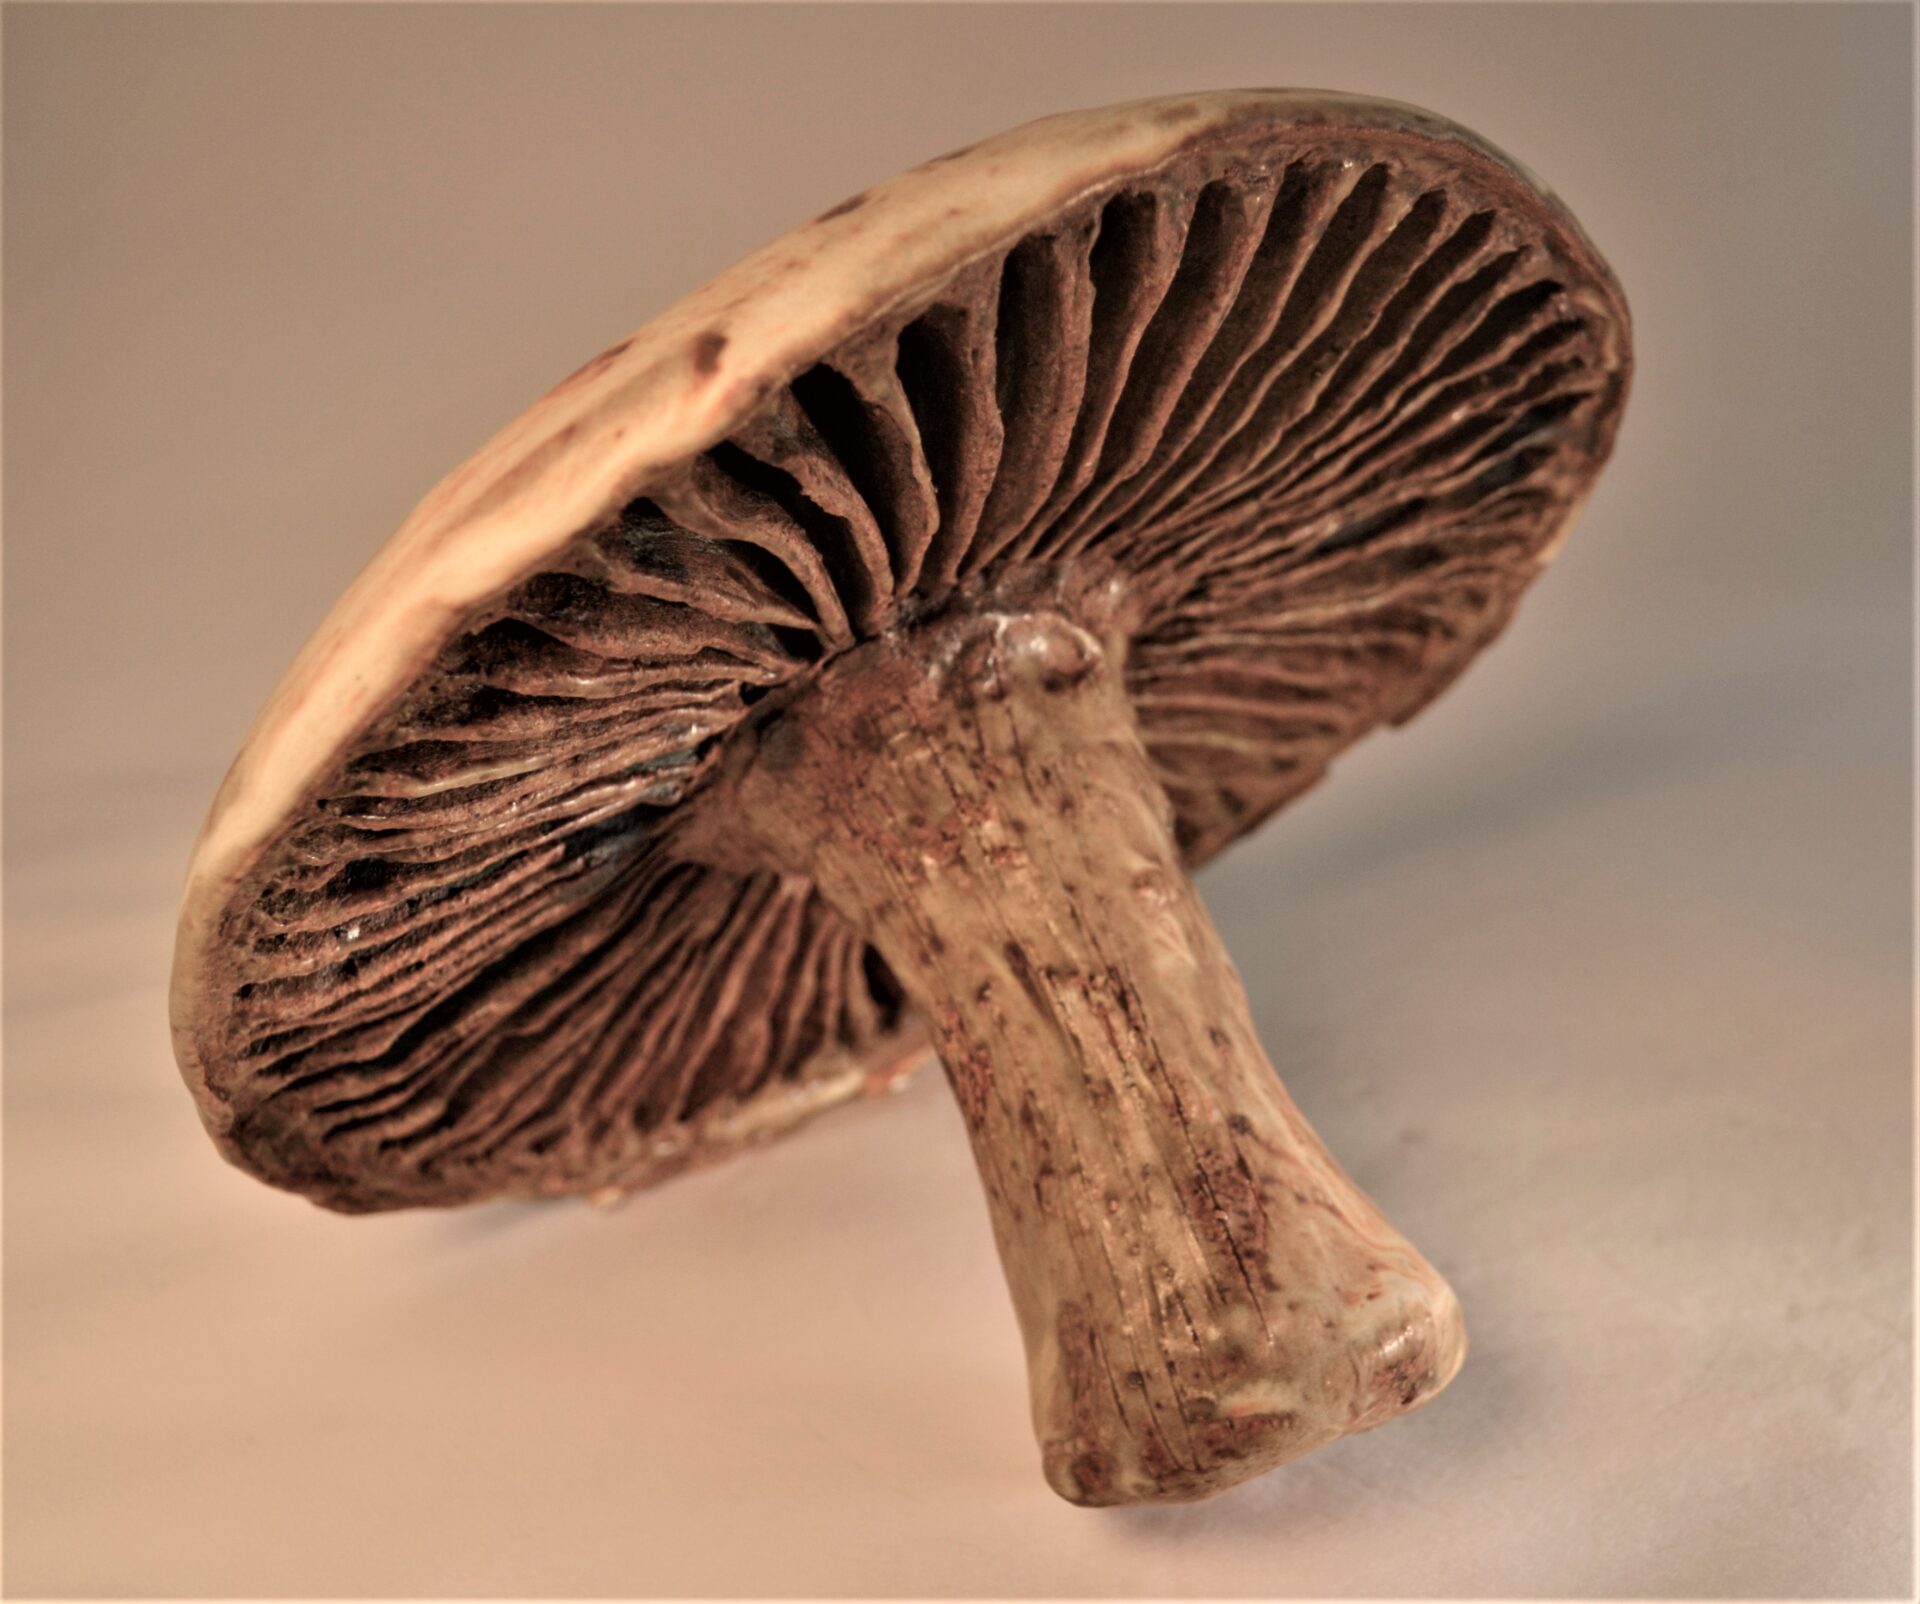 Ceramic art sculpture in the shape of a mushroom, color brown and beige